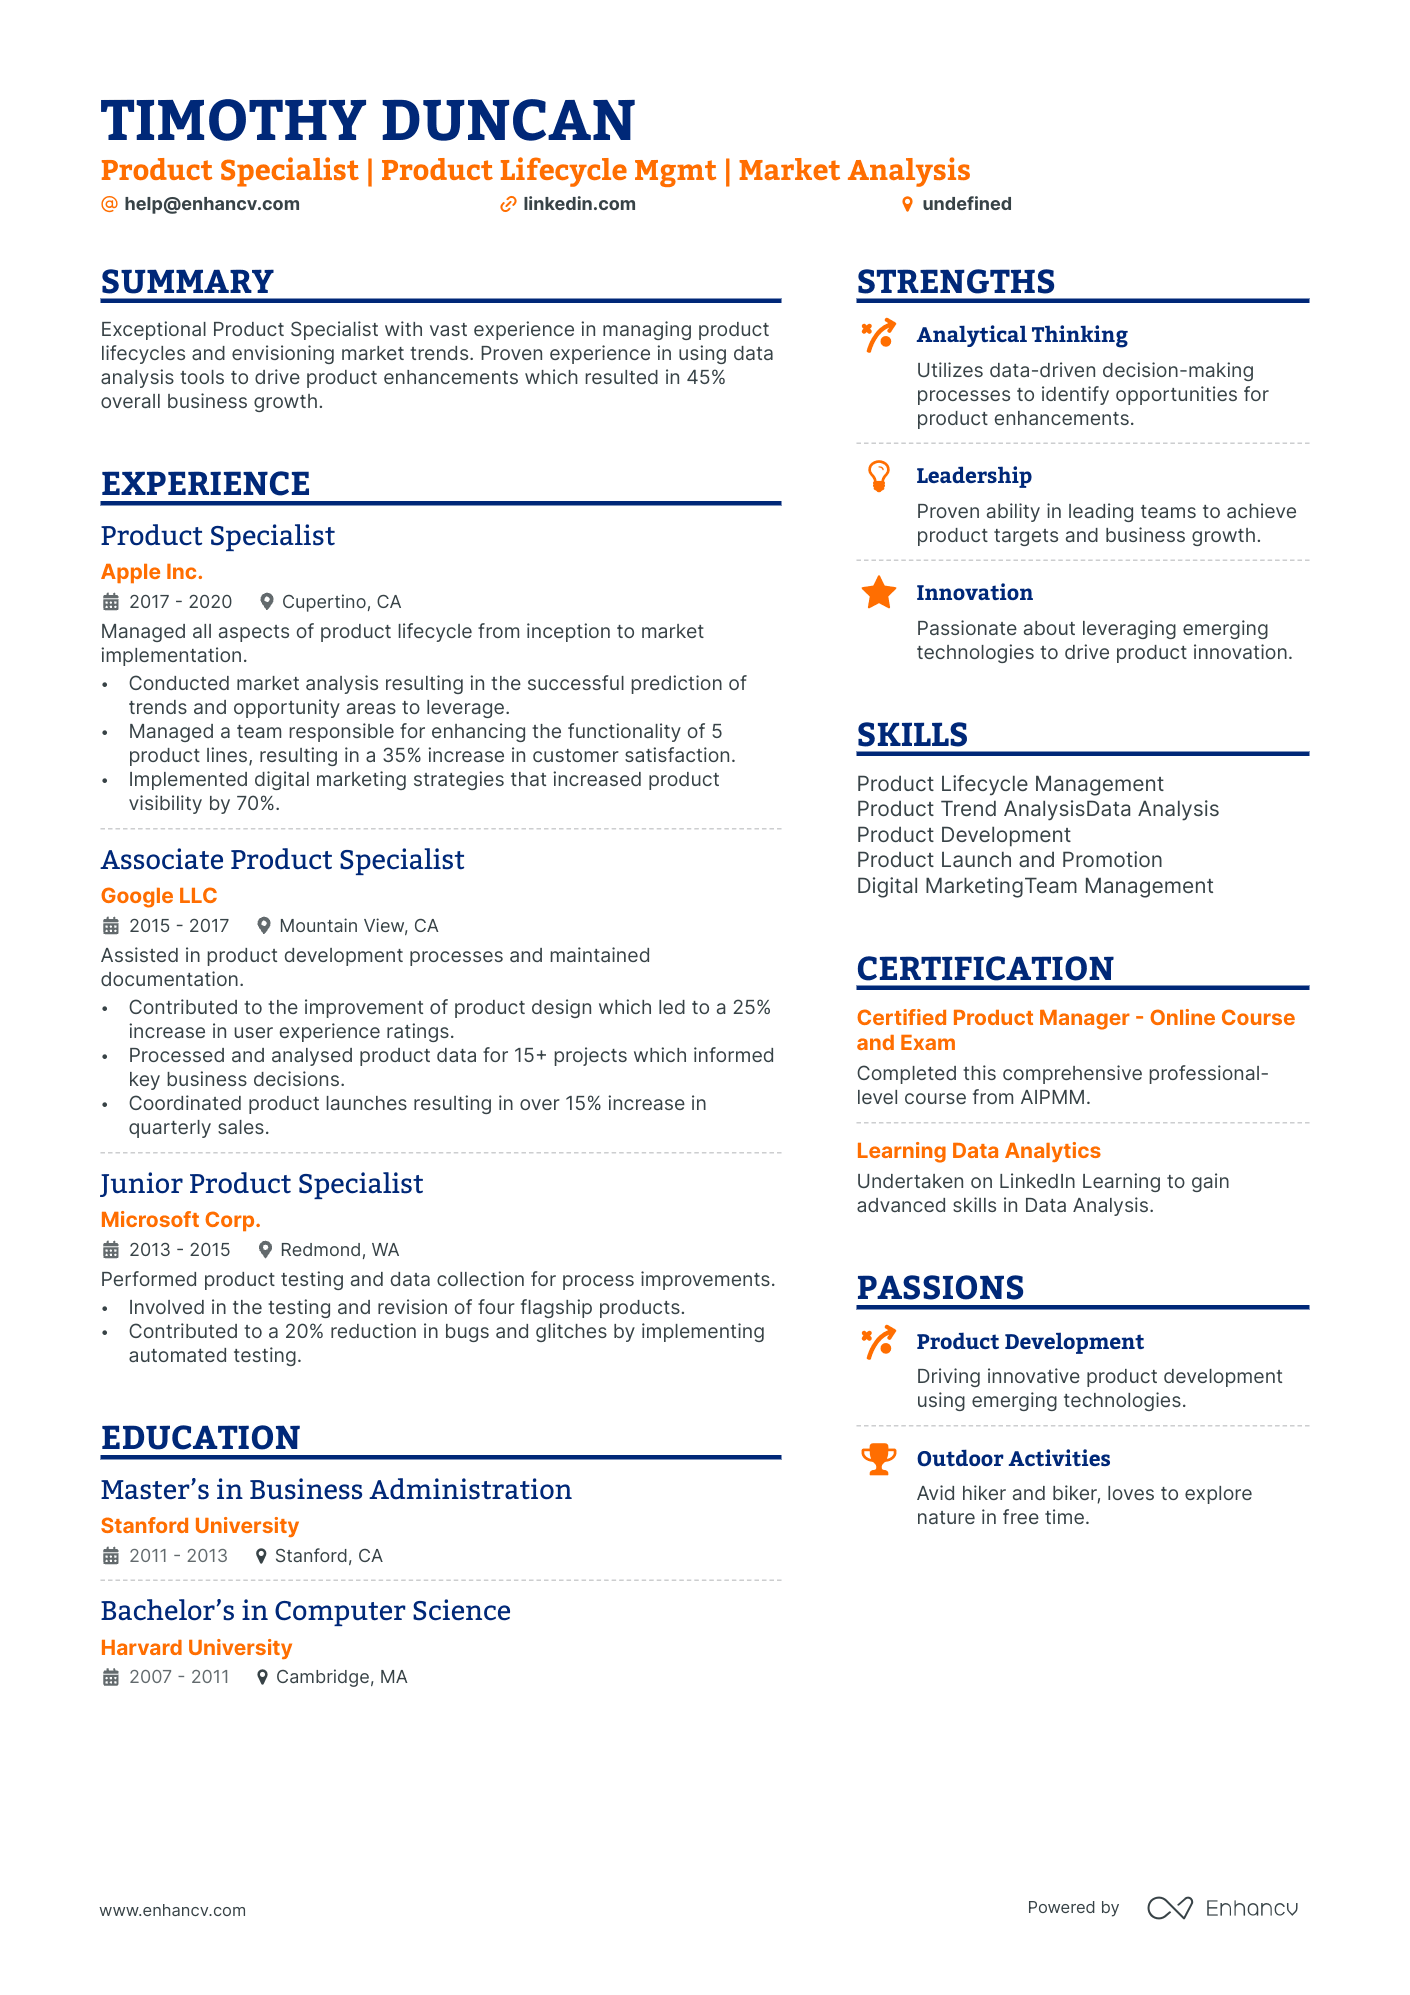 Product Specialist resume example